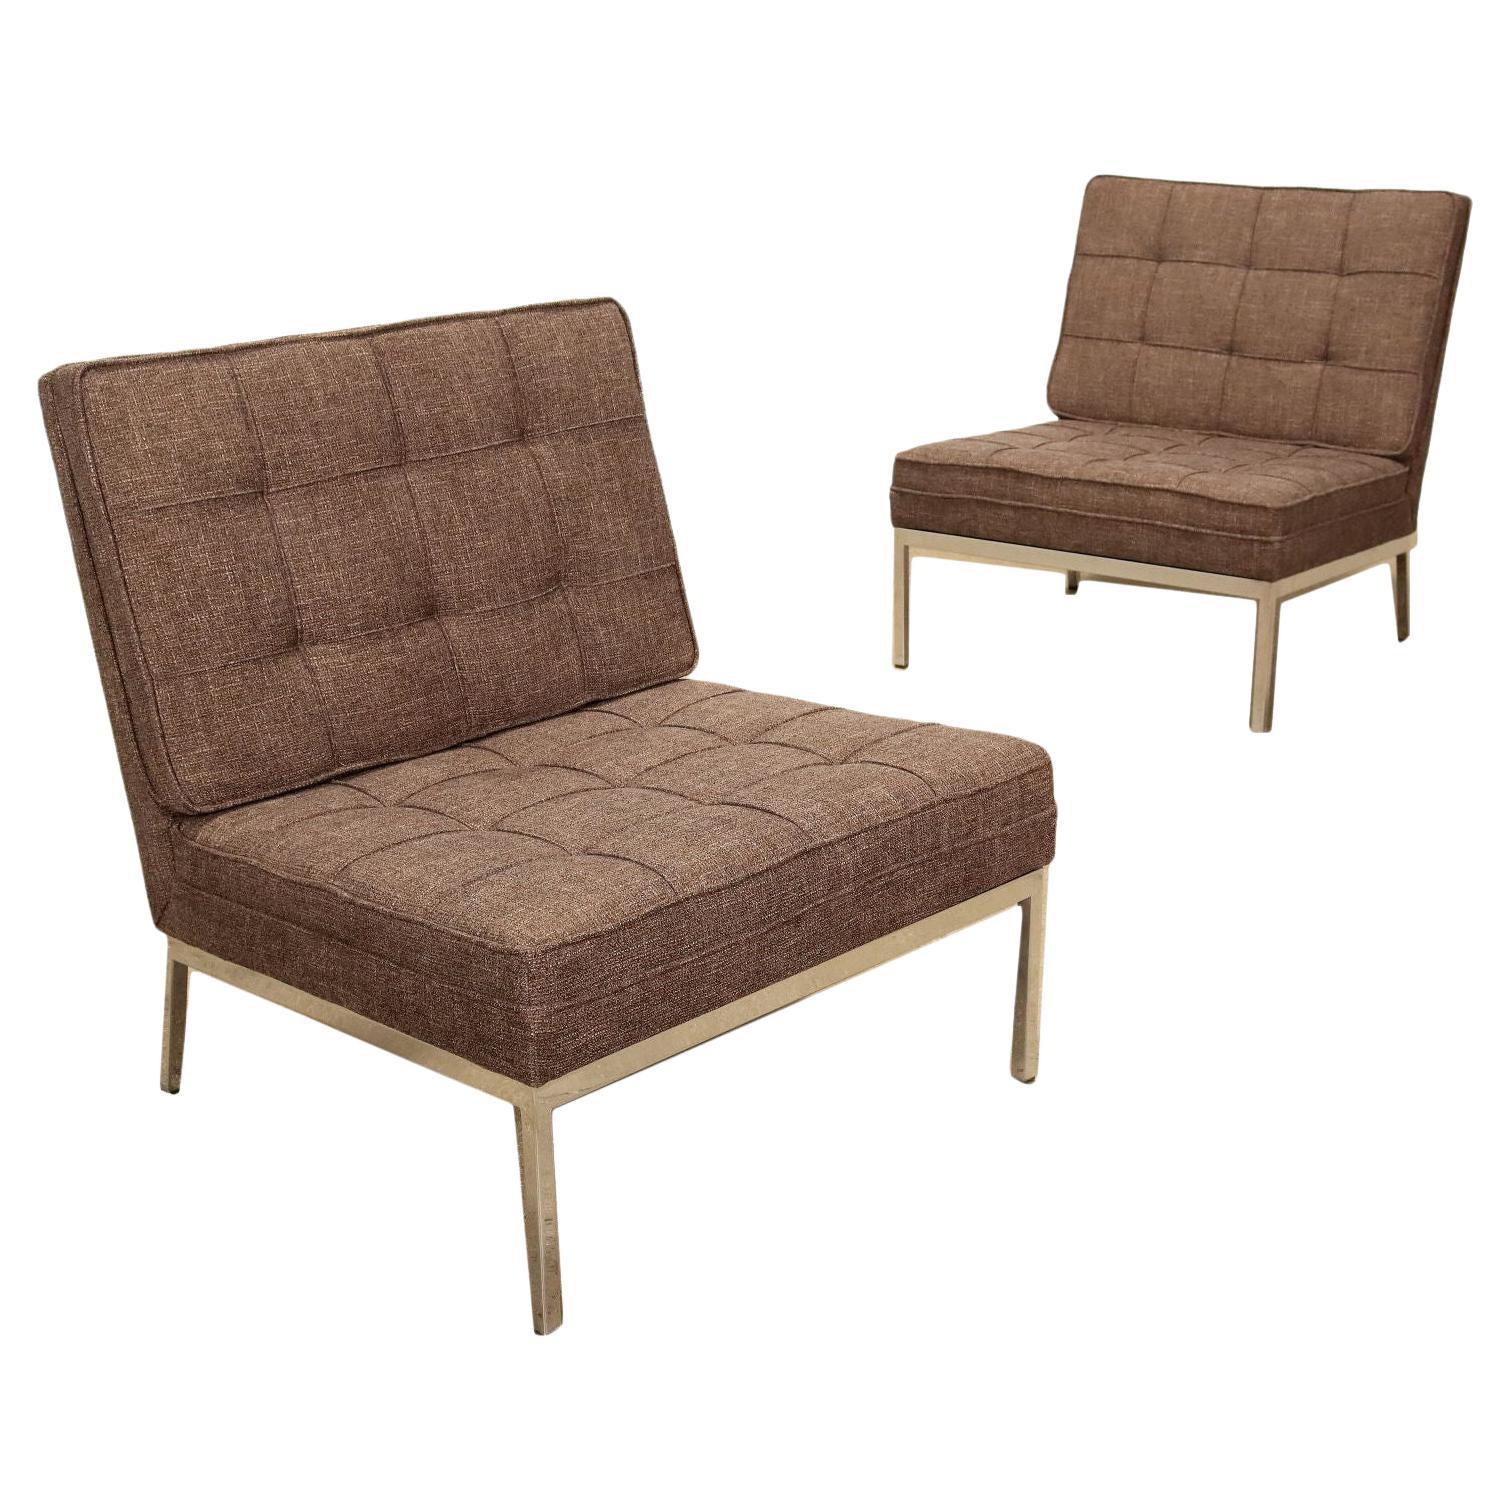 Two Armchairs '65 Slipper' Florence Knoll